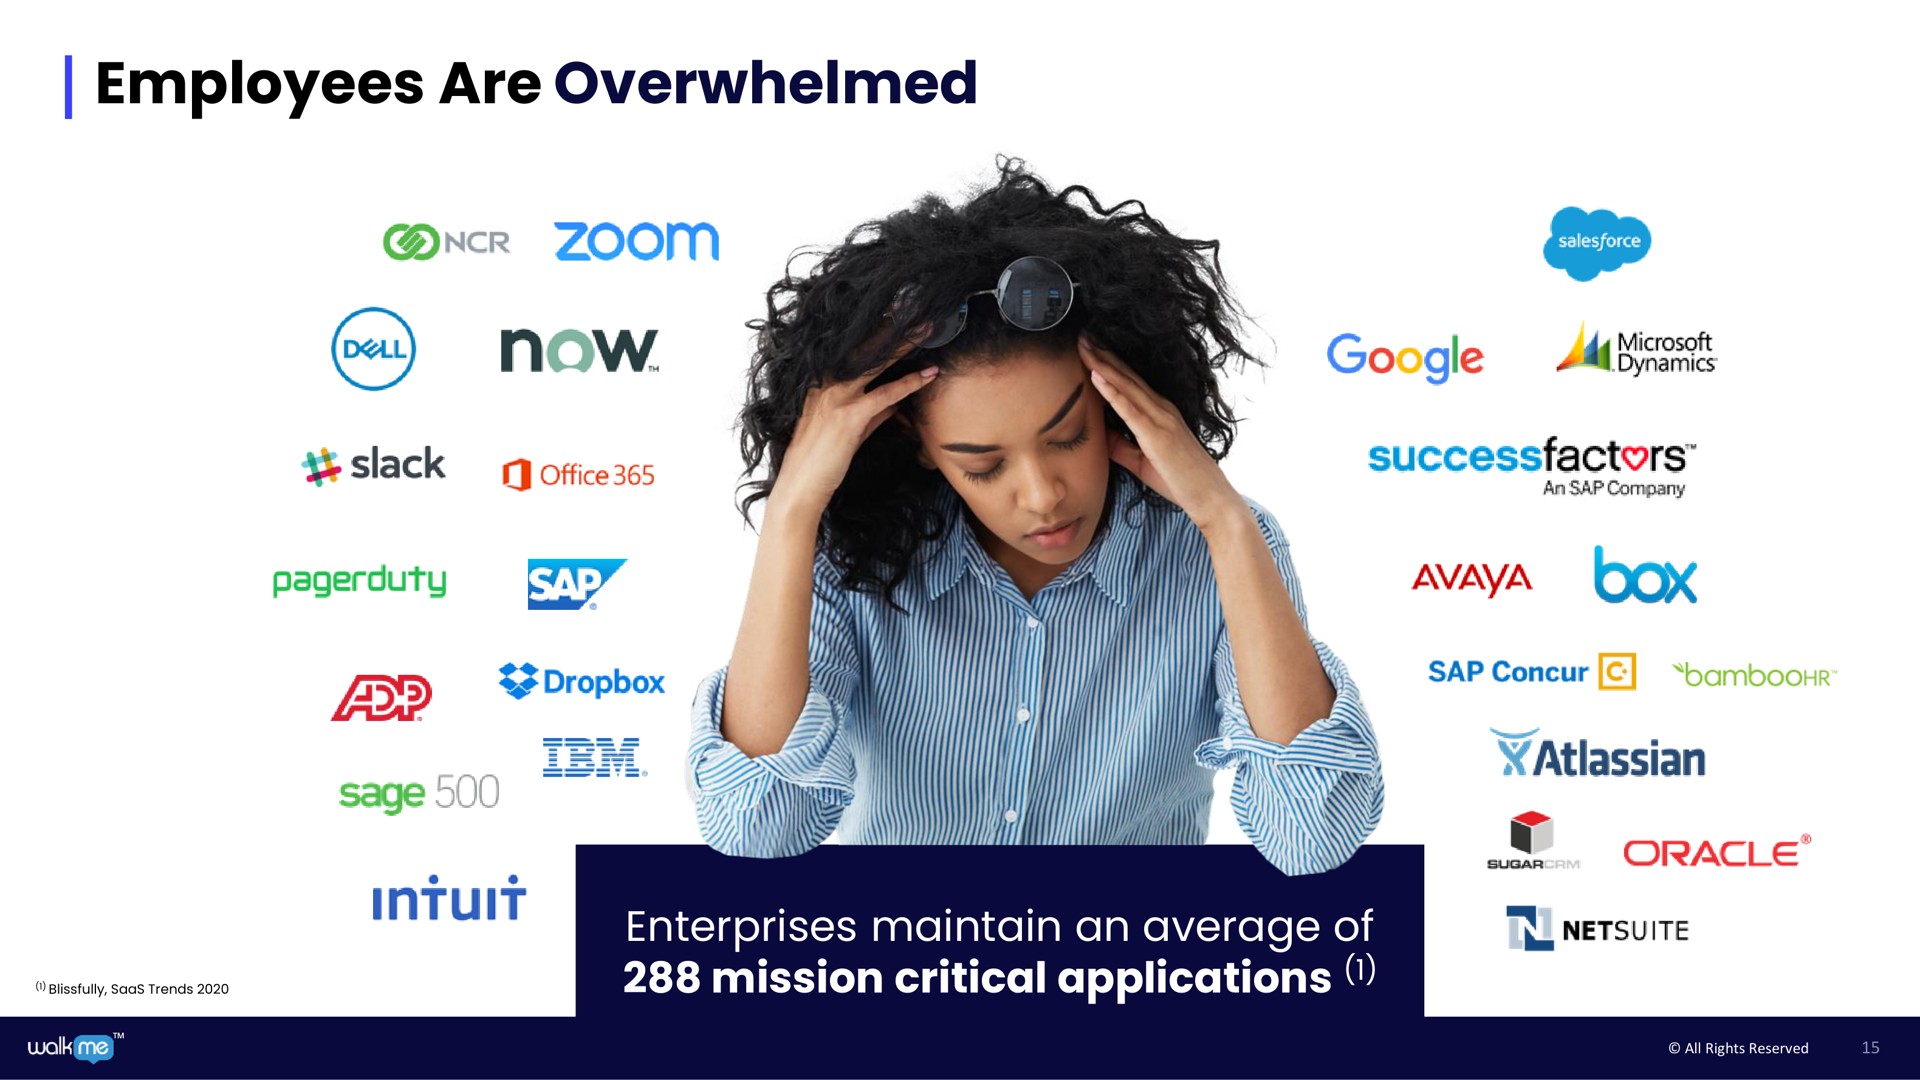 employees are overwhelmed zoom now i mission critical applications cute oracle | Walkme